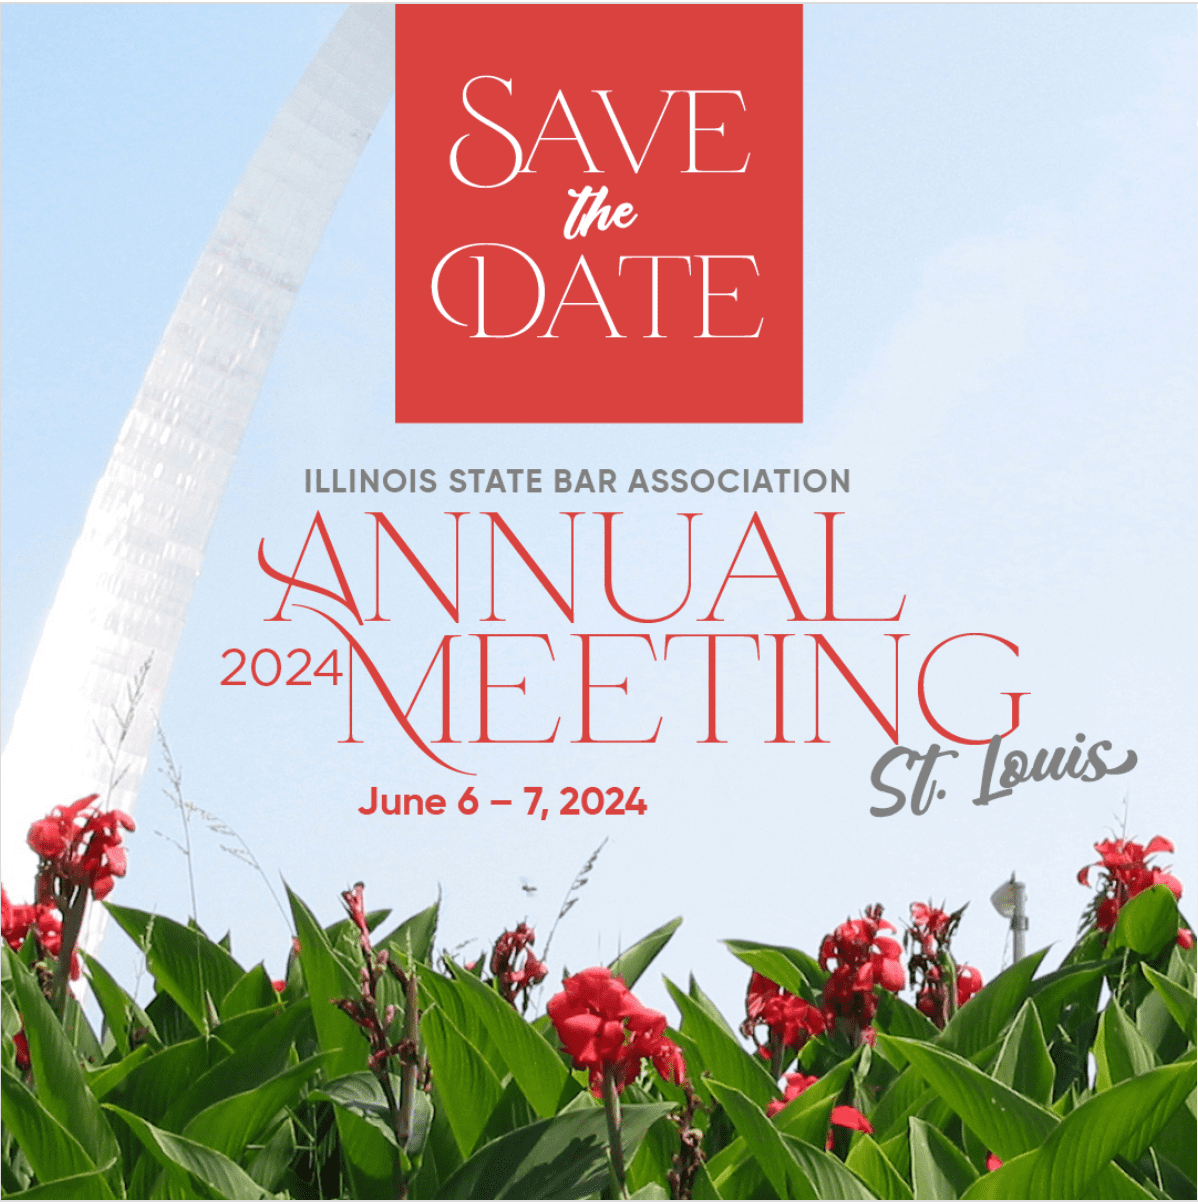 Jeremy Evans to speak at Illinois State Bar Association Annual Meeting in St. Louis, Missouri